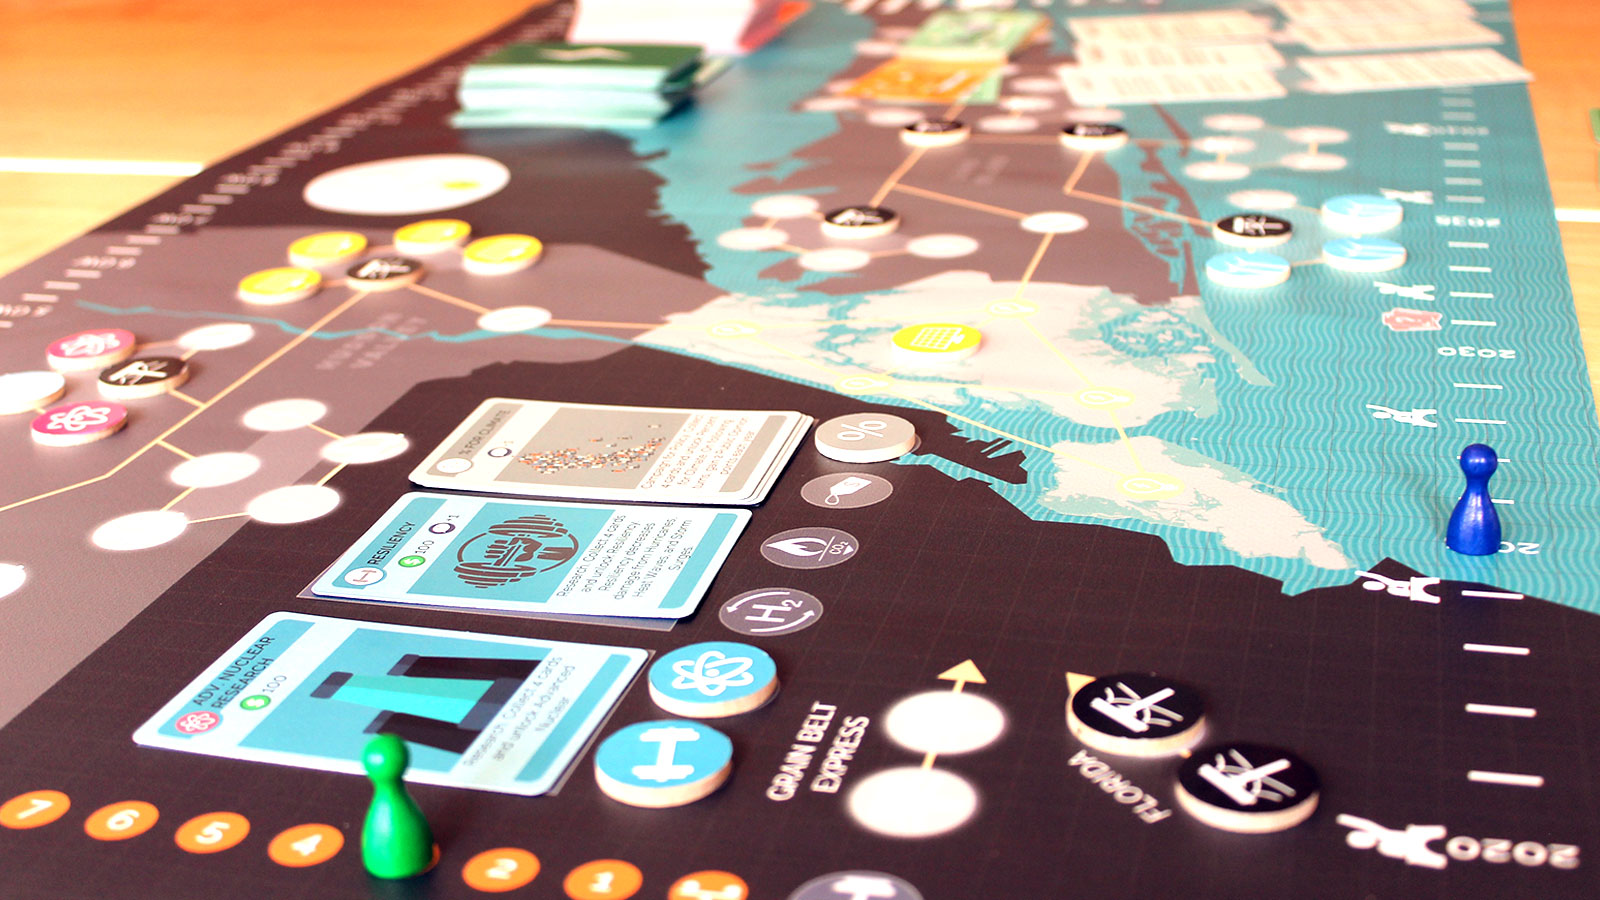 A photo of the board game Energetic showing playing cards and tokens on a map.